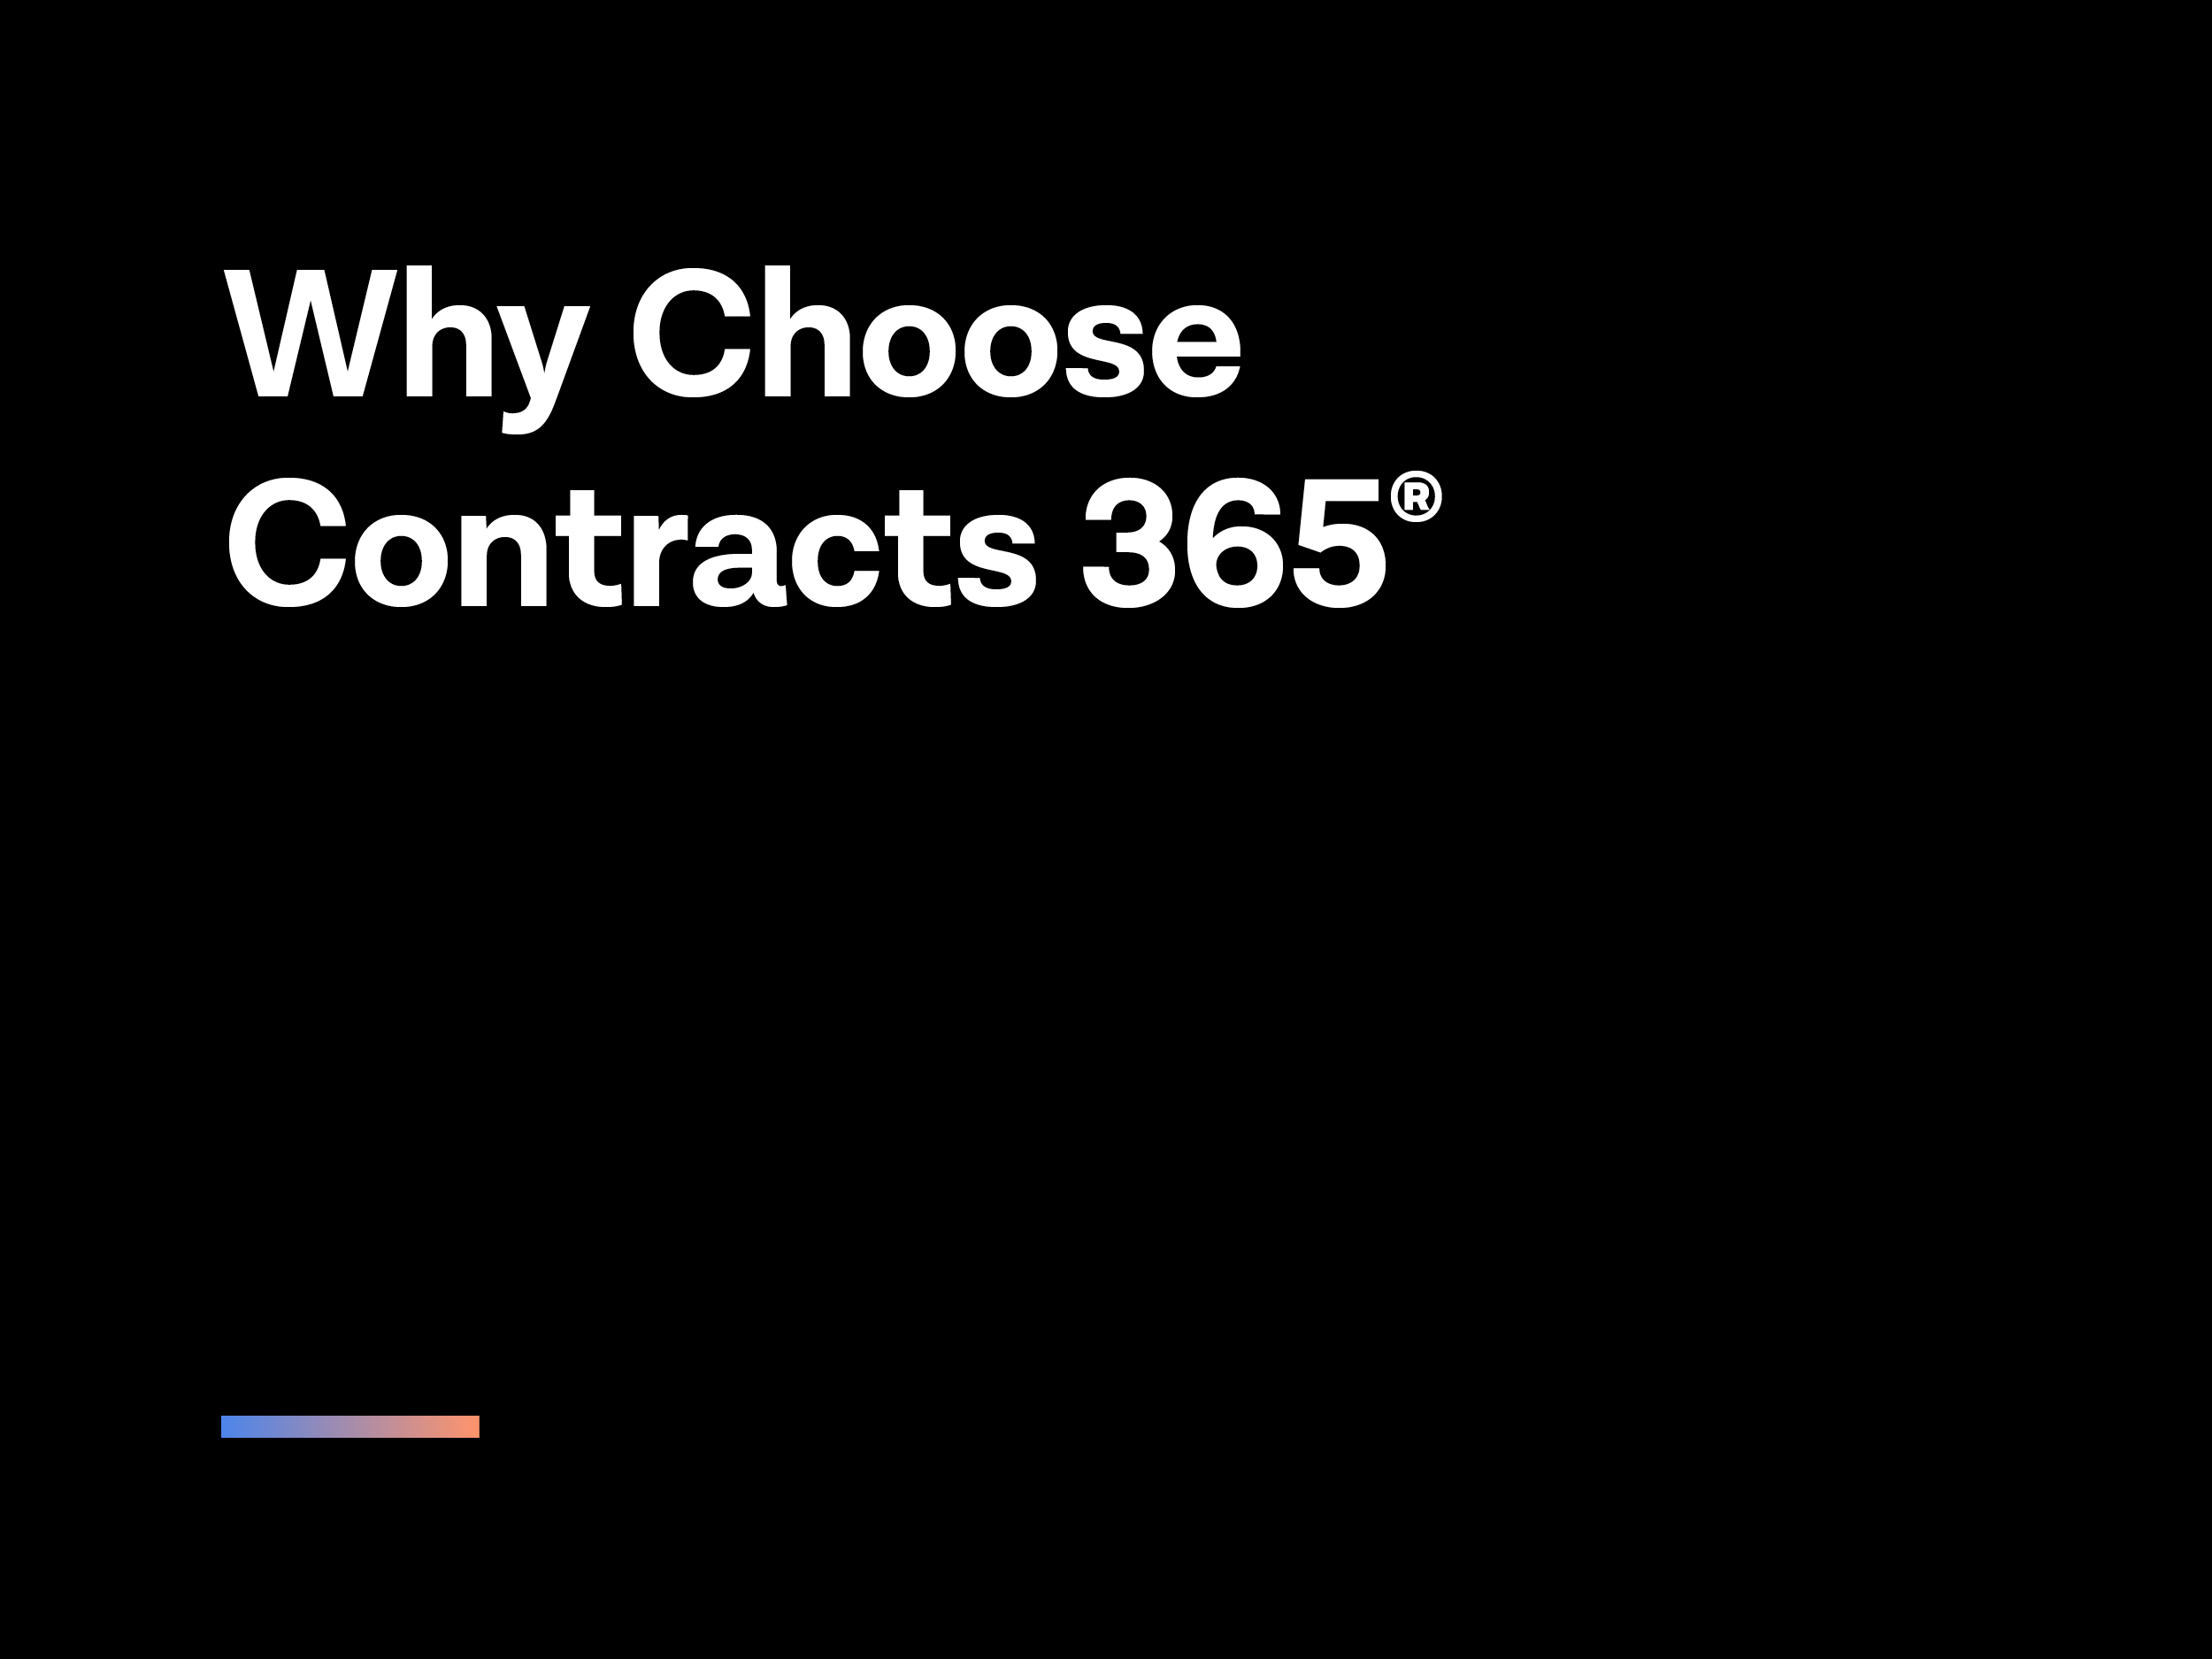 c365-ebook-why-choose-contracts365